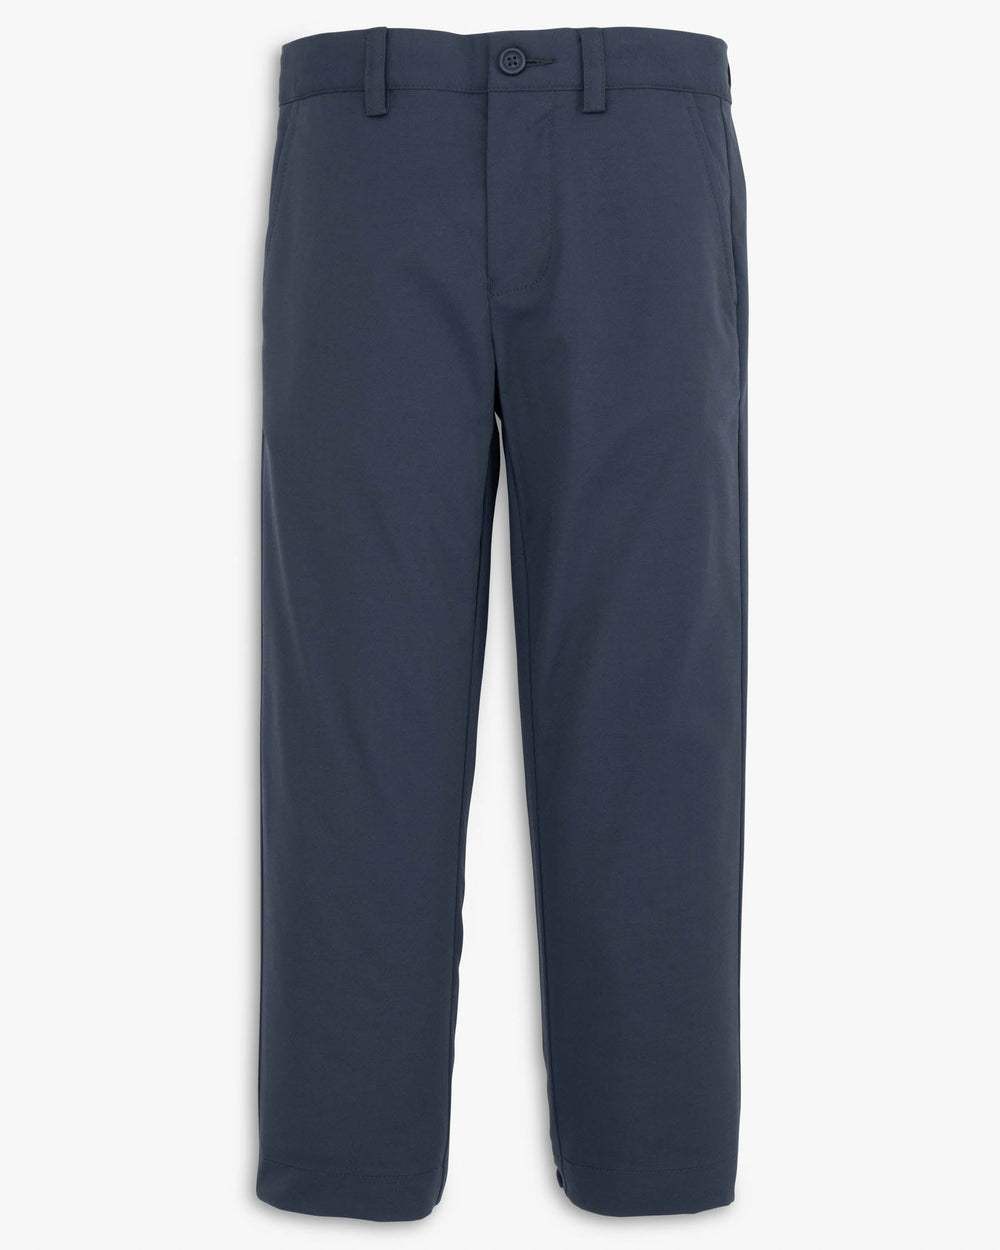 The front view of the Youth Leadhead Performance Pant by Southern Tide - True Navy